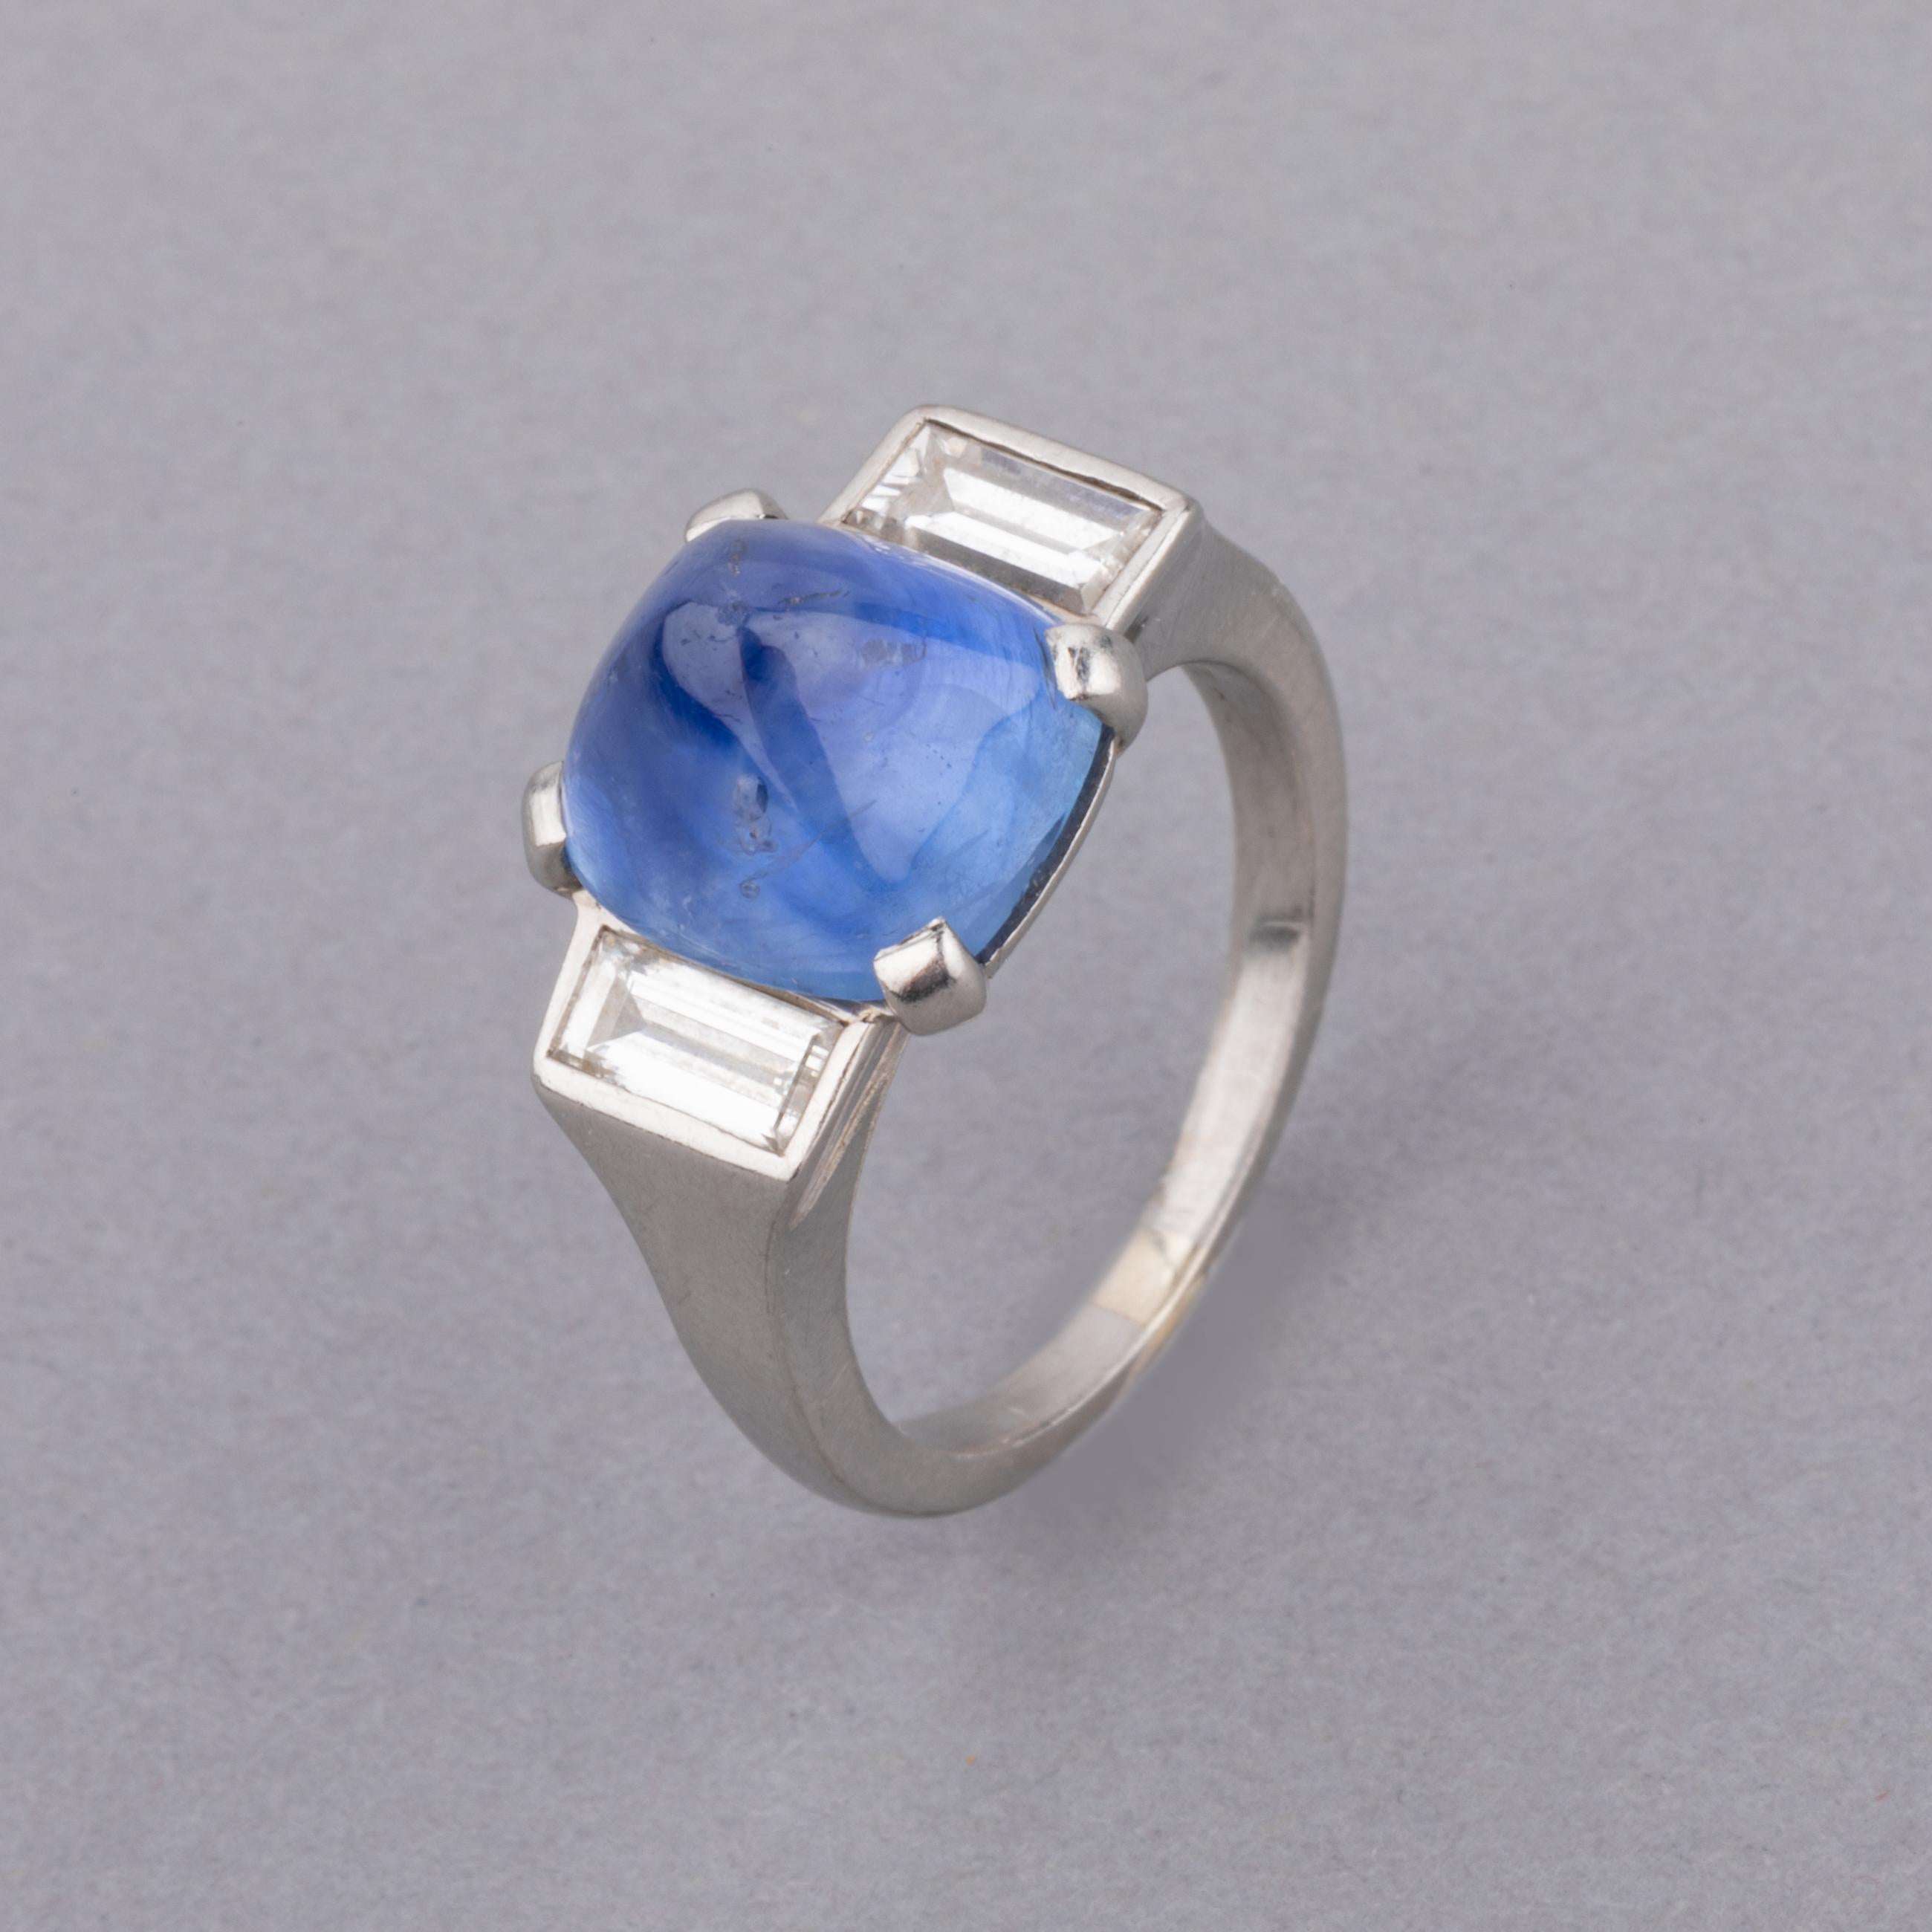 Cabochon 5 Carats Ceylan Sapphire and Diamonds Art Deco Ring by Mauboussin For Sale